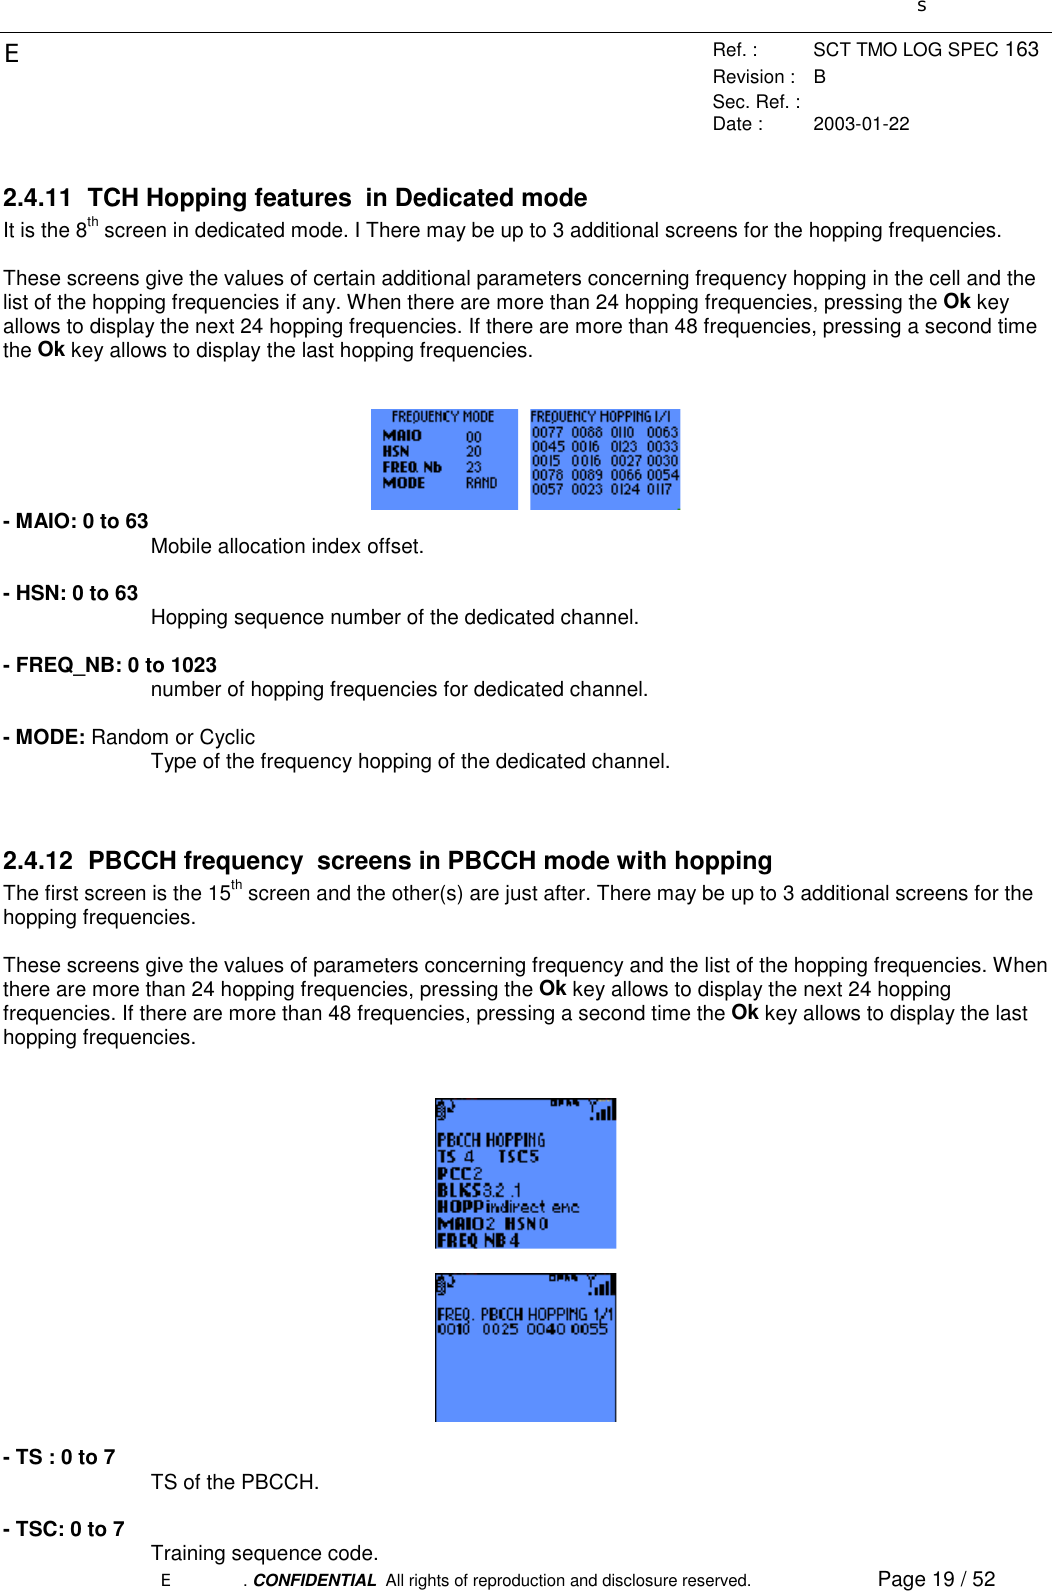 sERef. : SCT TMO LOG SPEC 163Revision : BSec. Ref. :Date : 2003-01-22E. CONFIDENTIAL  All rights of reproduction and disclosure reserved. Page 19 / 522.4.11  TCH Hopping features  in Dedicated modeIt is the 8th screen in dedicated mode. I There may be up to 3 additional screens for the hopping frequencies.These screens give the values of certain additional parameters concerning frequency hopping in the cell and thelist of the hopping frequencies if any. When there are more than 24 hopping frequencies, pressing the Ok keyallows to display the next 24 hopping frequencies. If there are more than 48 frequencies, pressing a second timethe Ok key allows to display the last hopping frequencies.  - MAIO: 0 to 63Mobile allocation index offset.- HSN: 0 to 63 Hopping sequence number of the dedicated channel.- FREQ_NB: 0 to 1023number of hopping frequencies for dedicated channel.- MODE: Random or CyclicType of the frequency hopping of the dedicated channel.2.4.12  PBCCH frequency  screens in PBCCH mode with hoppingThe first screen is the 15th screen and the other(s) are just after. There may be up to 3 additional screens for thehopping frequencies.These screens give the values of parameters concerning frequency and the list of the hopping frequencies. Whenthere are more than 24 hopping frequencies, pressing the Ok key allows to display the next 24 hoppingfrequencies. If there are more than 48 frequencies, pressing a second time the Ok key allows to display the lasthopping frequencies.- TS : 0 to 7 TS of the PBCCH.- TSC: 0 to 7 Training sequence code.